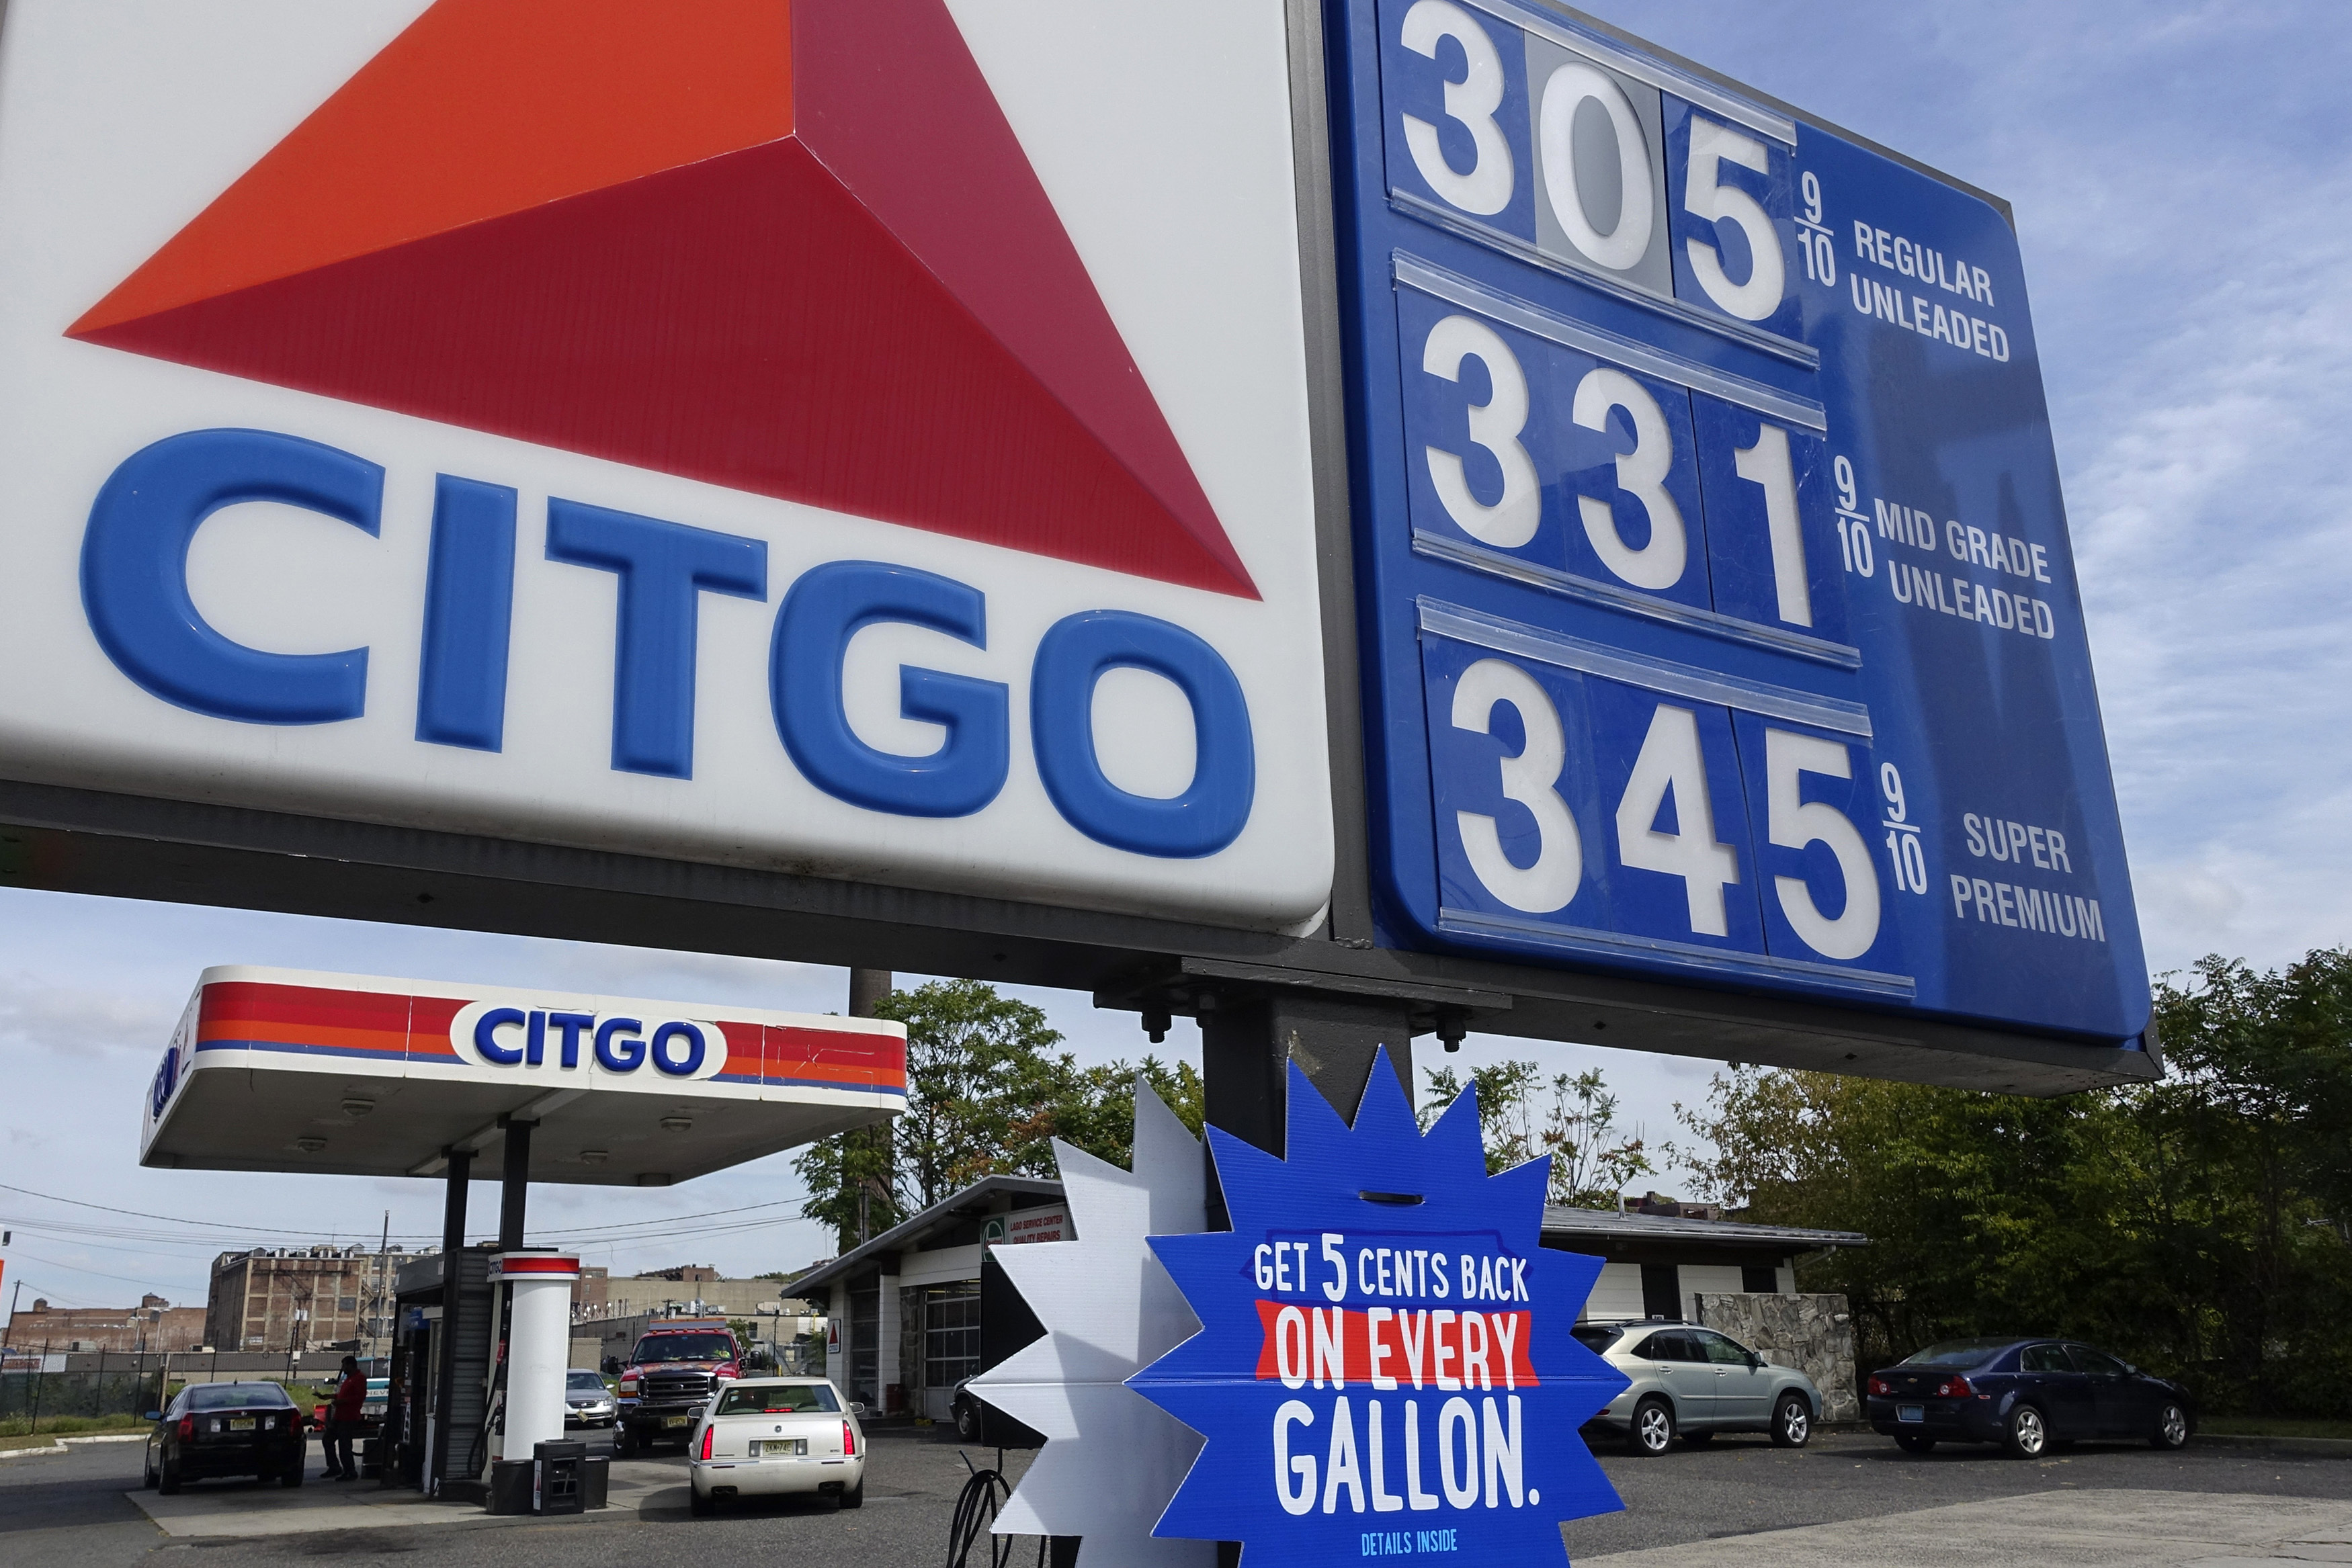 People fuel their cars at a Citgo gas station in Kearny, New Jersey